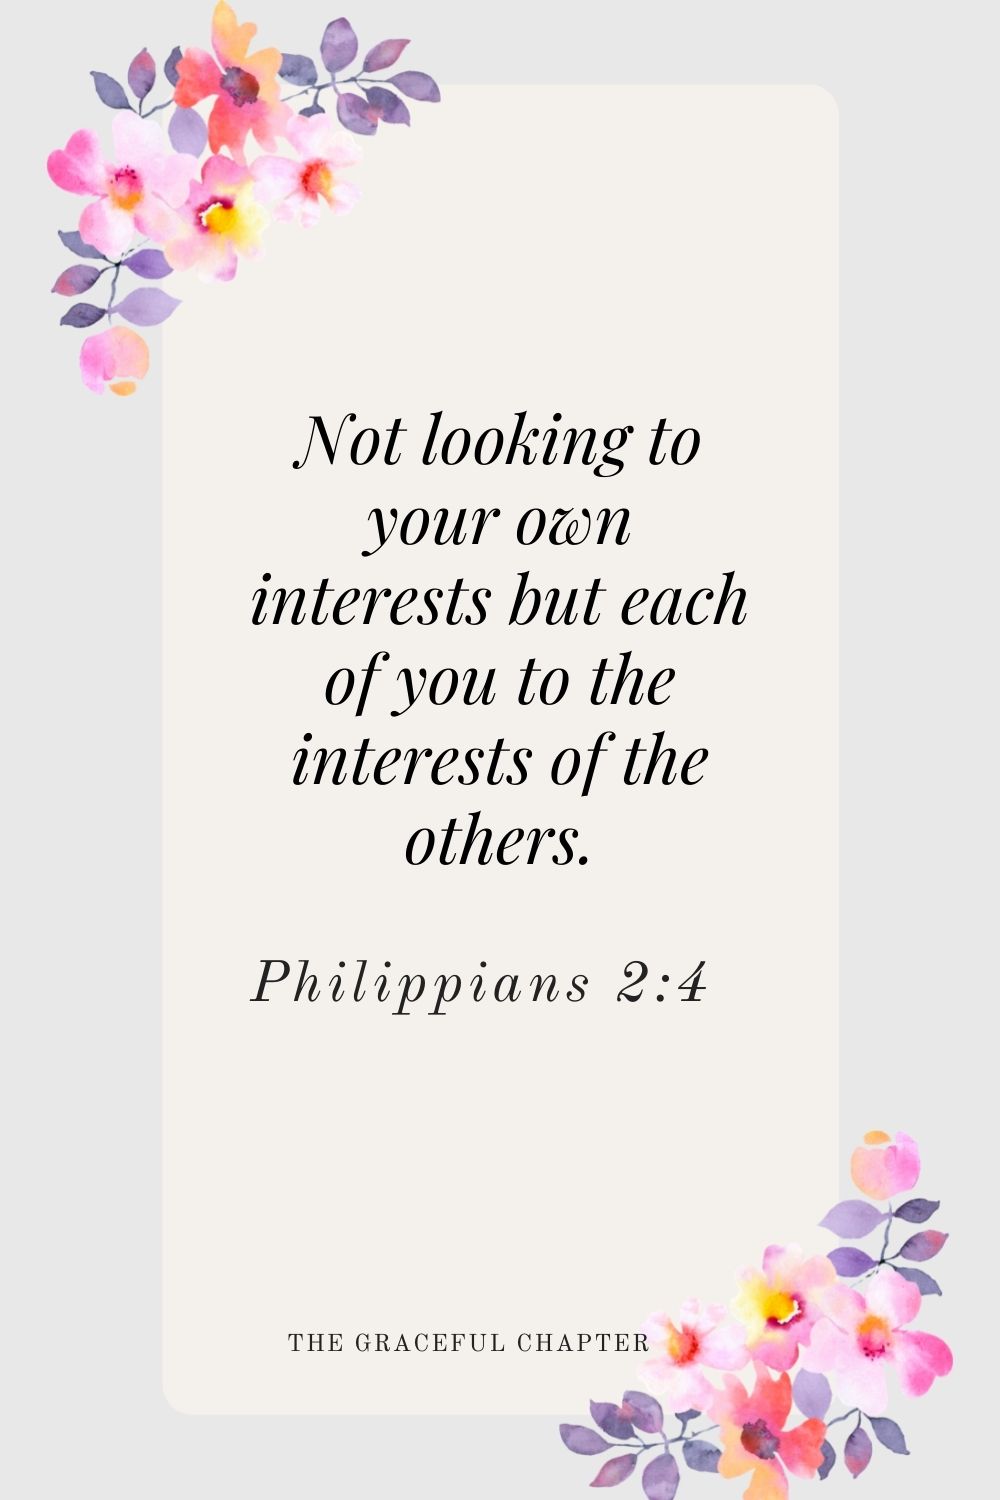 Not looking to your own interests but each of you to the interests of the others. Philippians 2:4